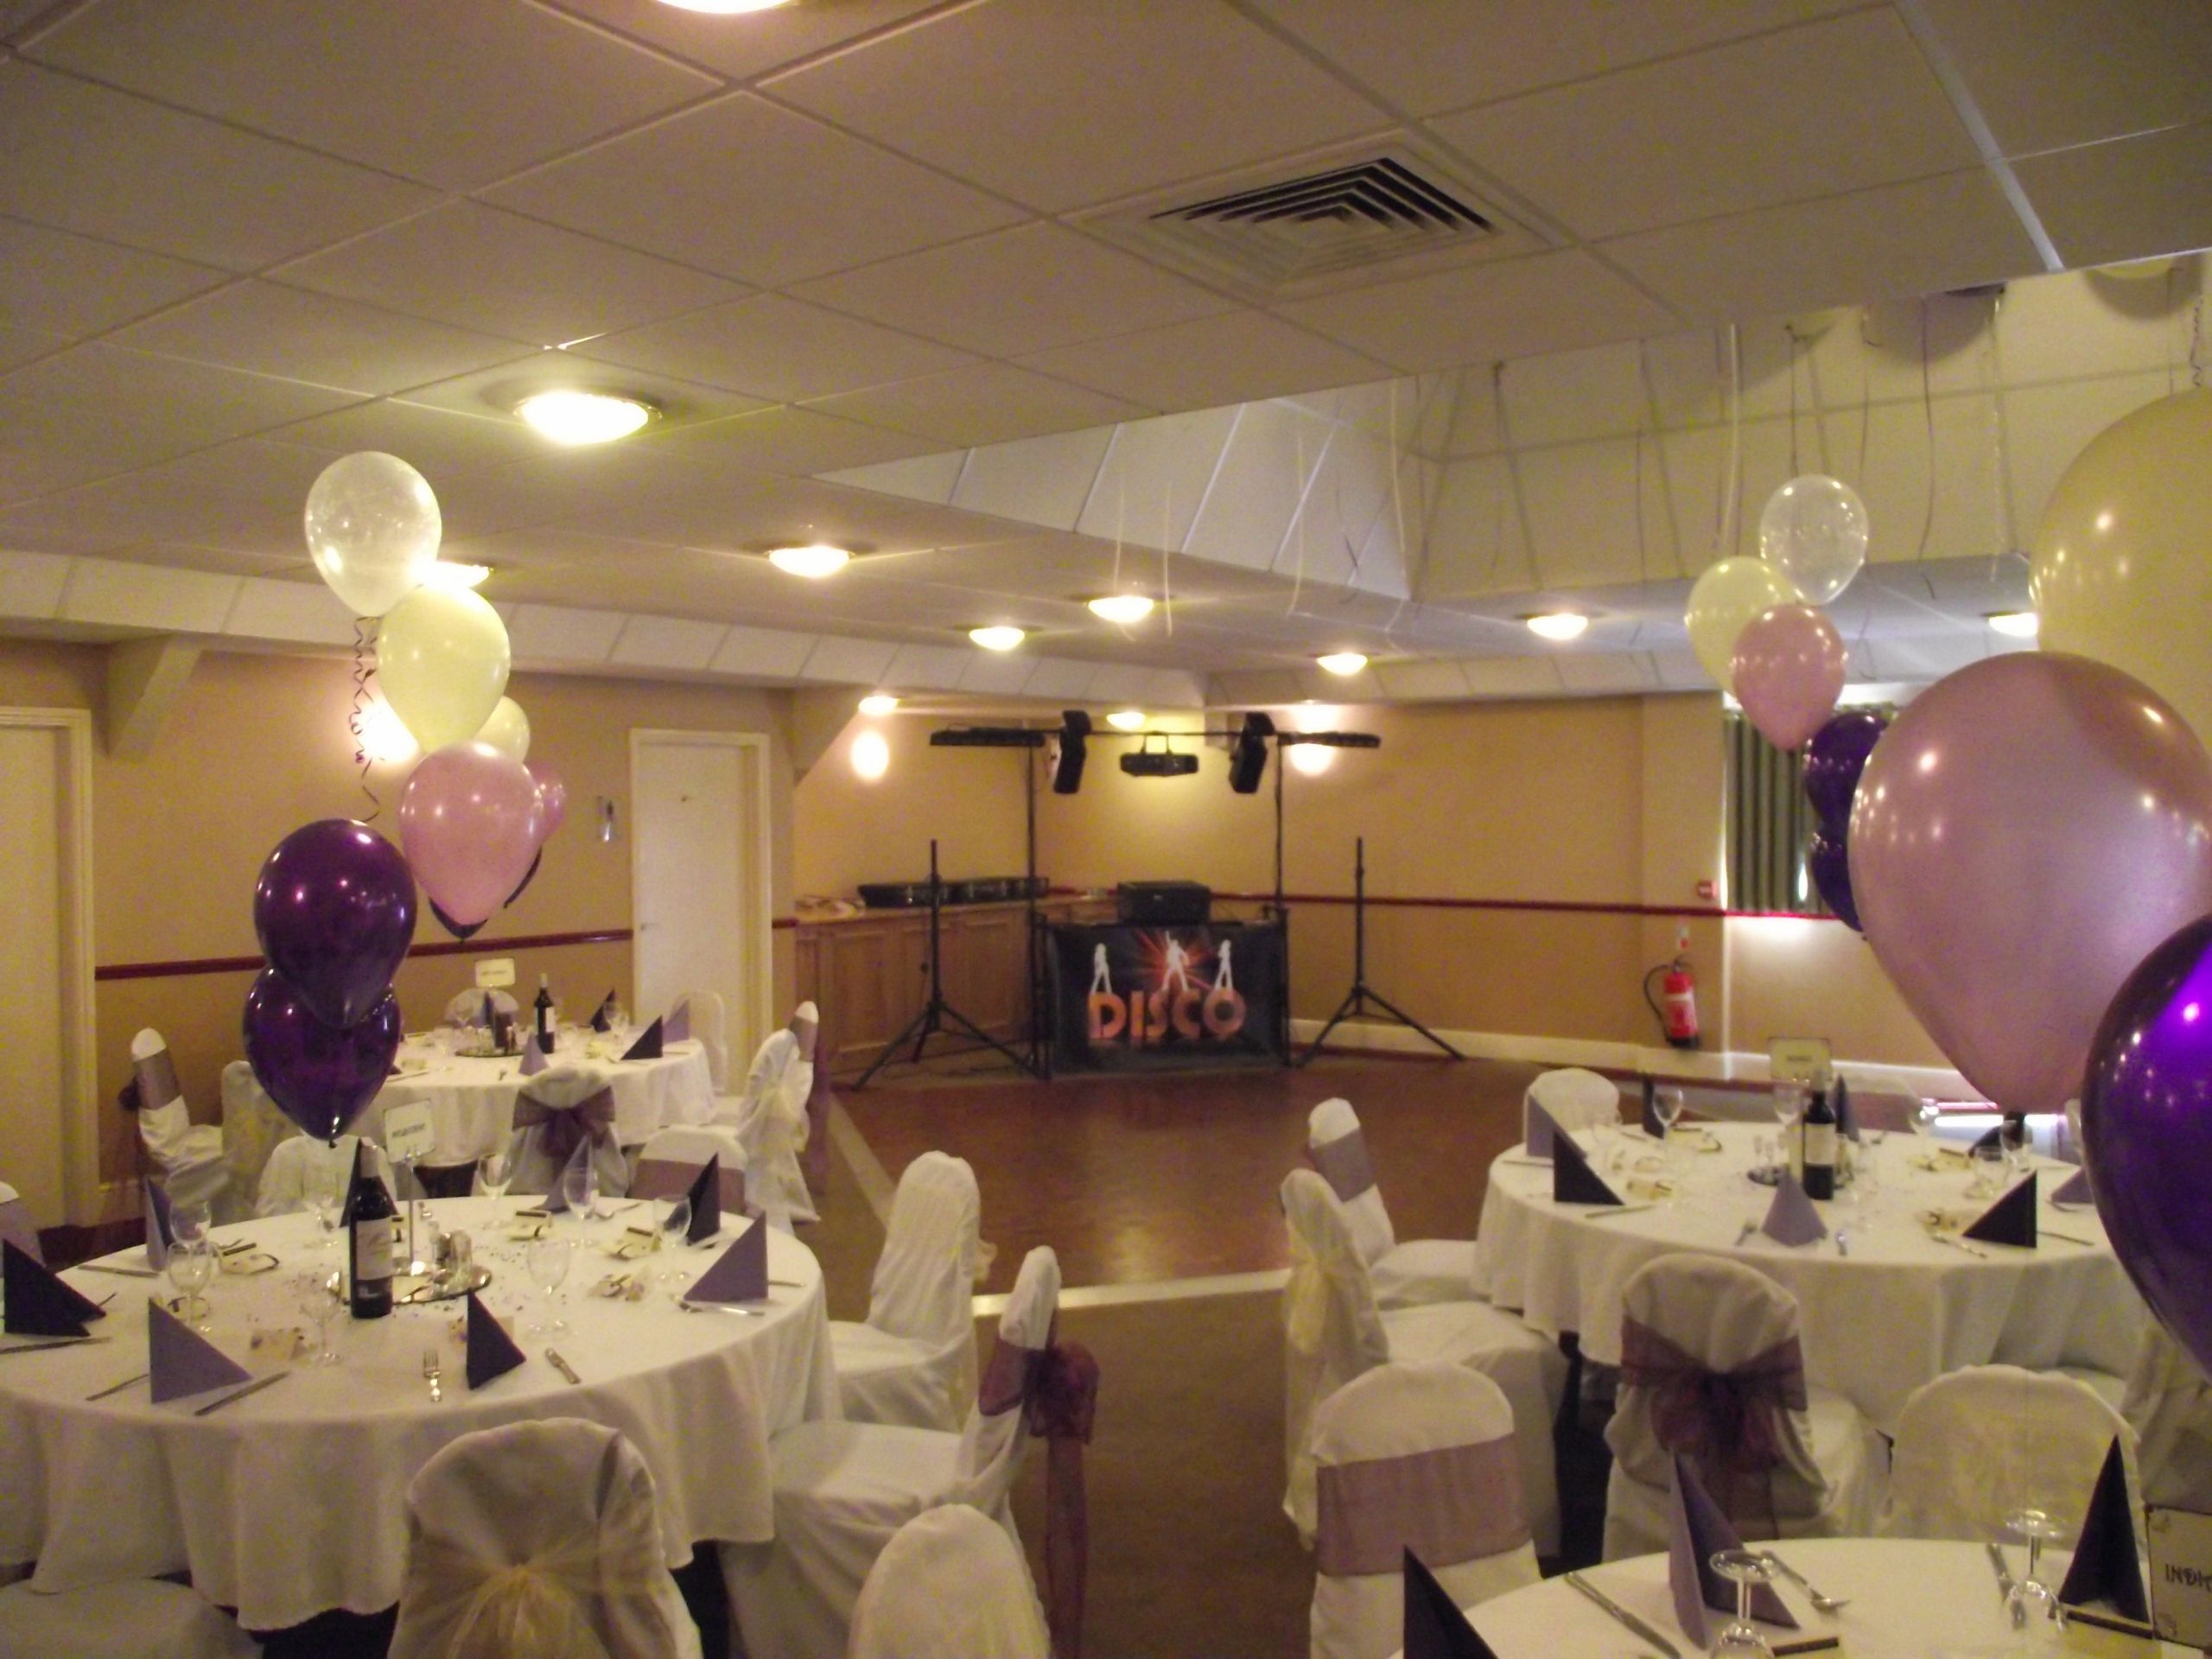 Engagement Party Decorating Ideas On A Budget
 Engagement Parties advice & ideas from Roundwood Norwich